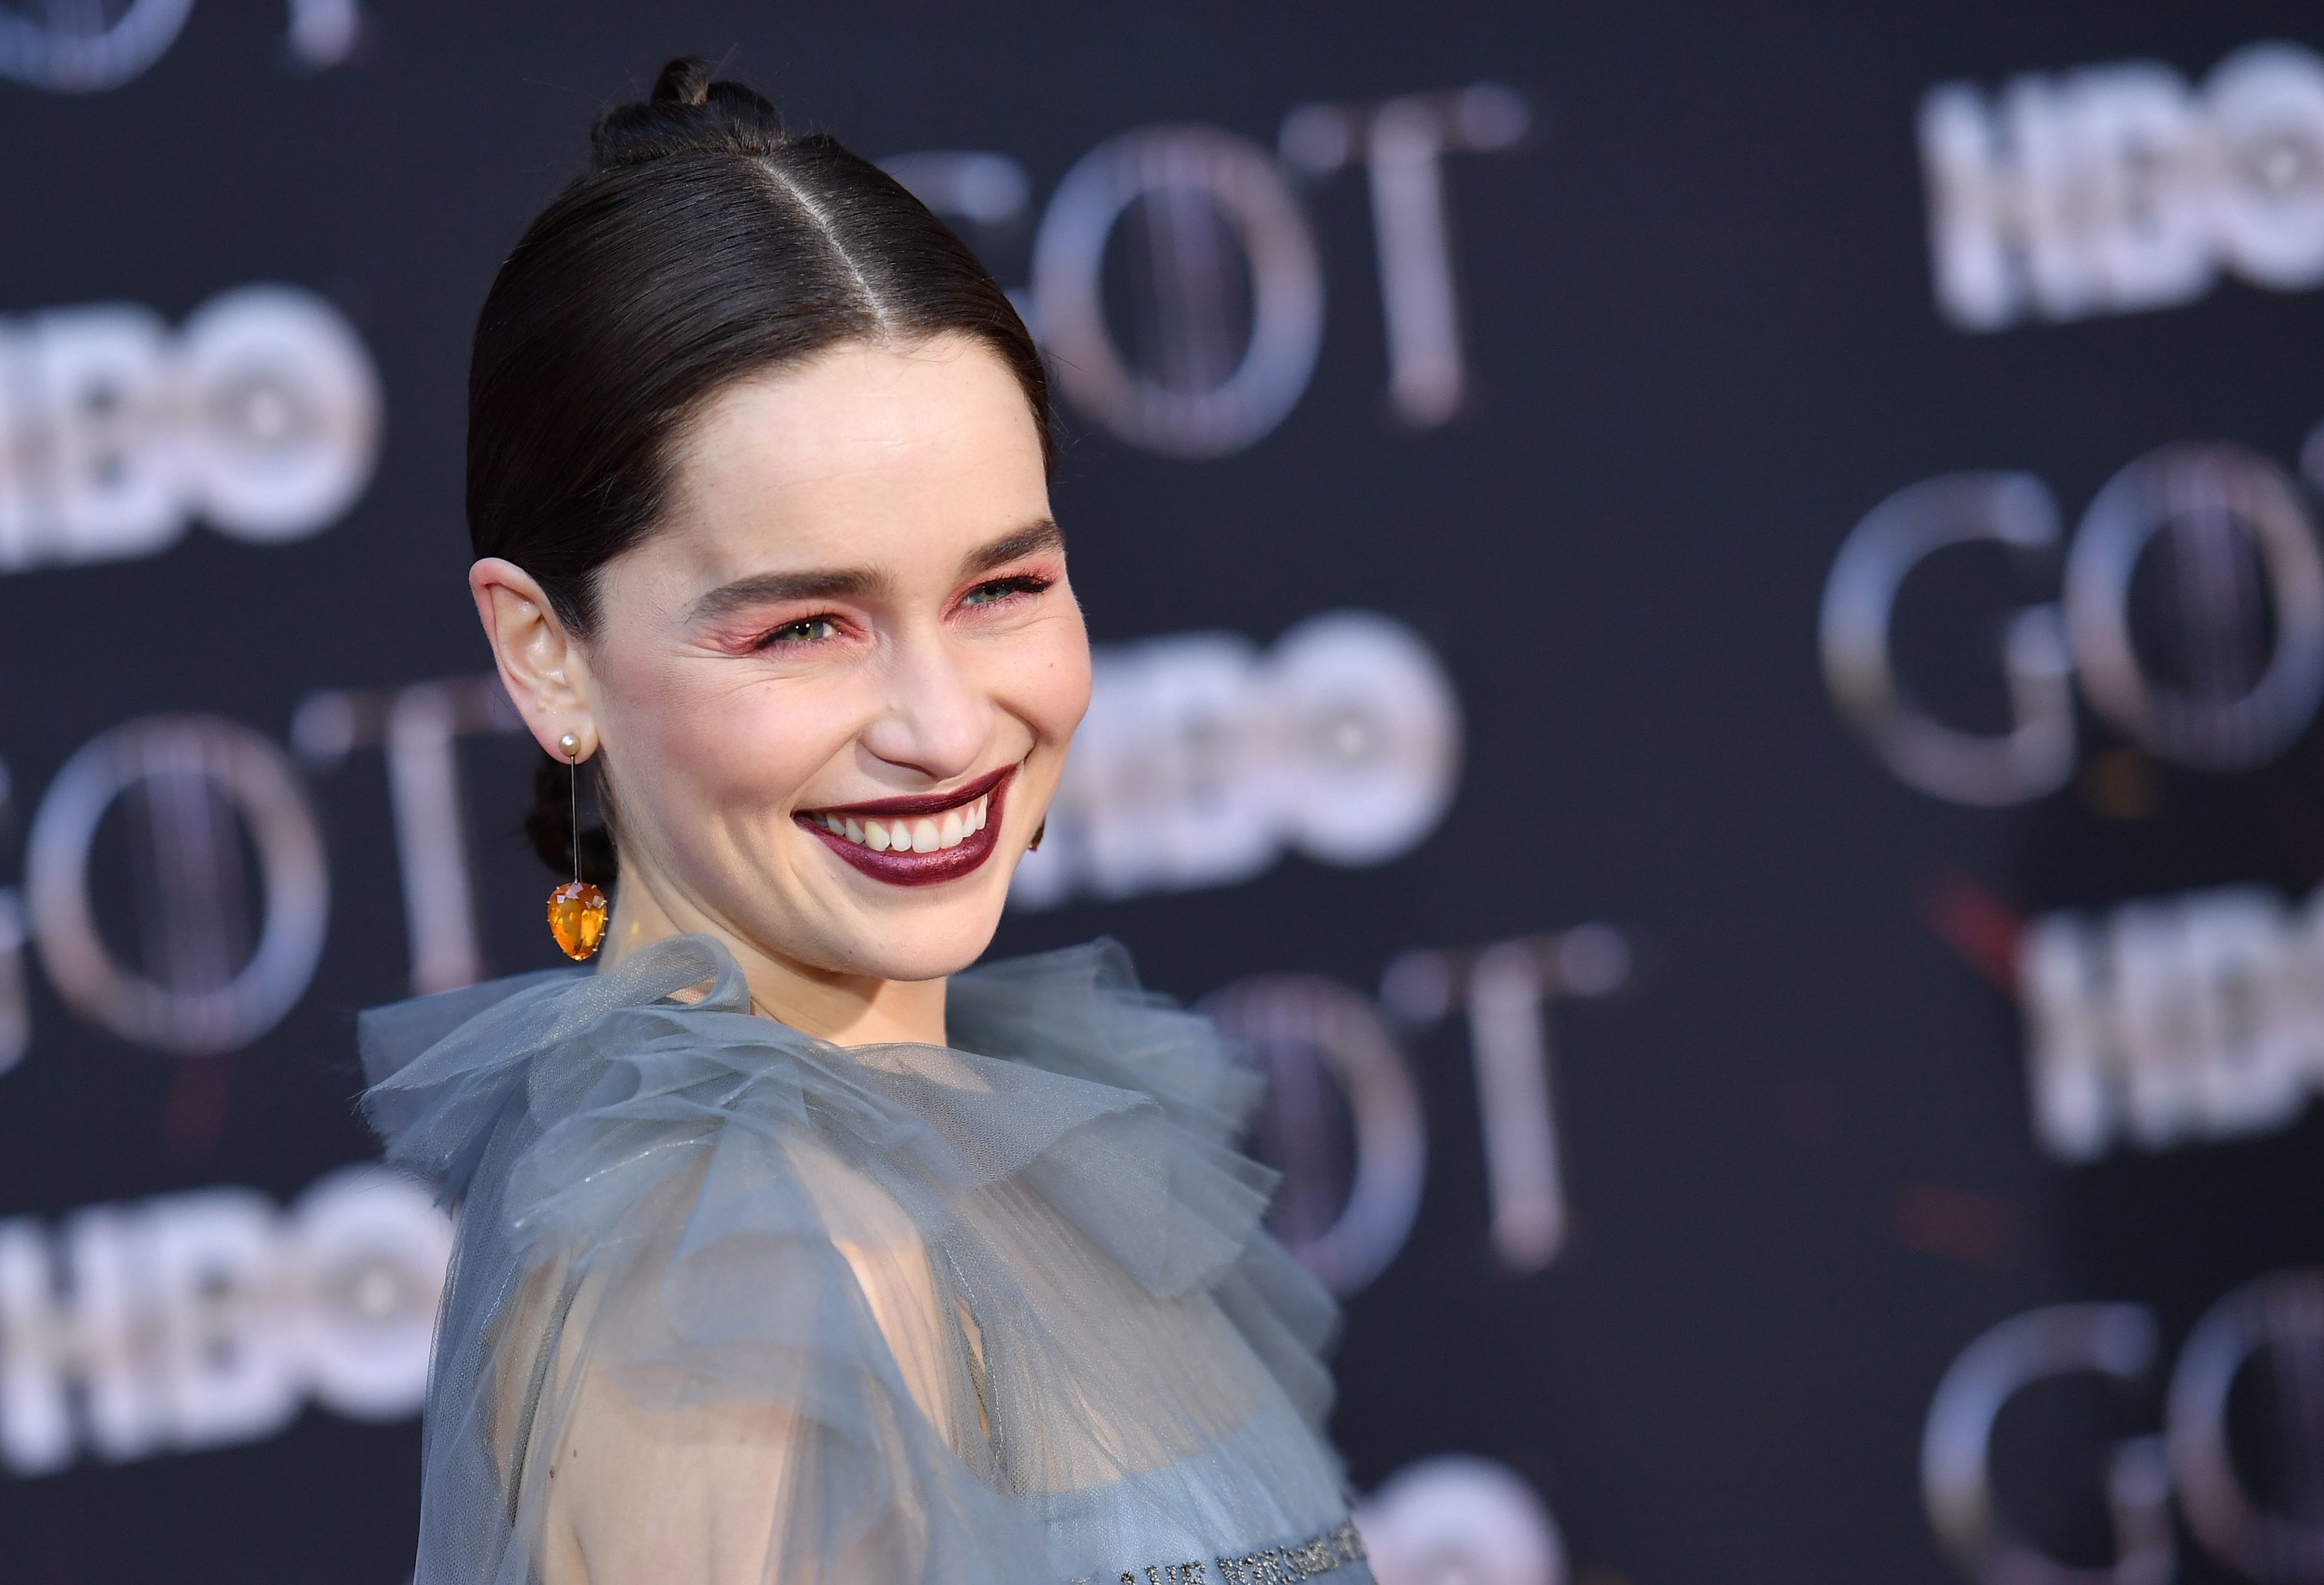 Game of Thrones star Emilia Clarke won't watch House of the Dragon